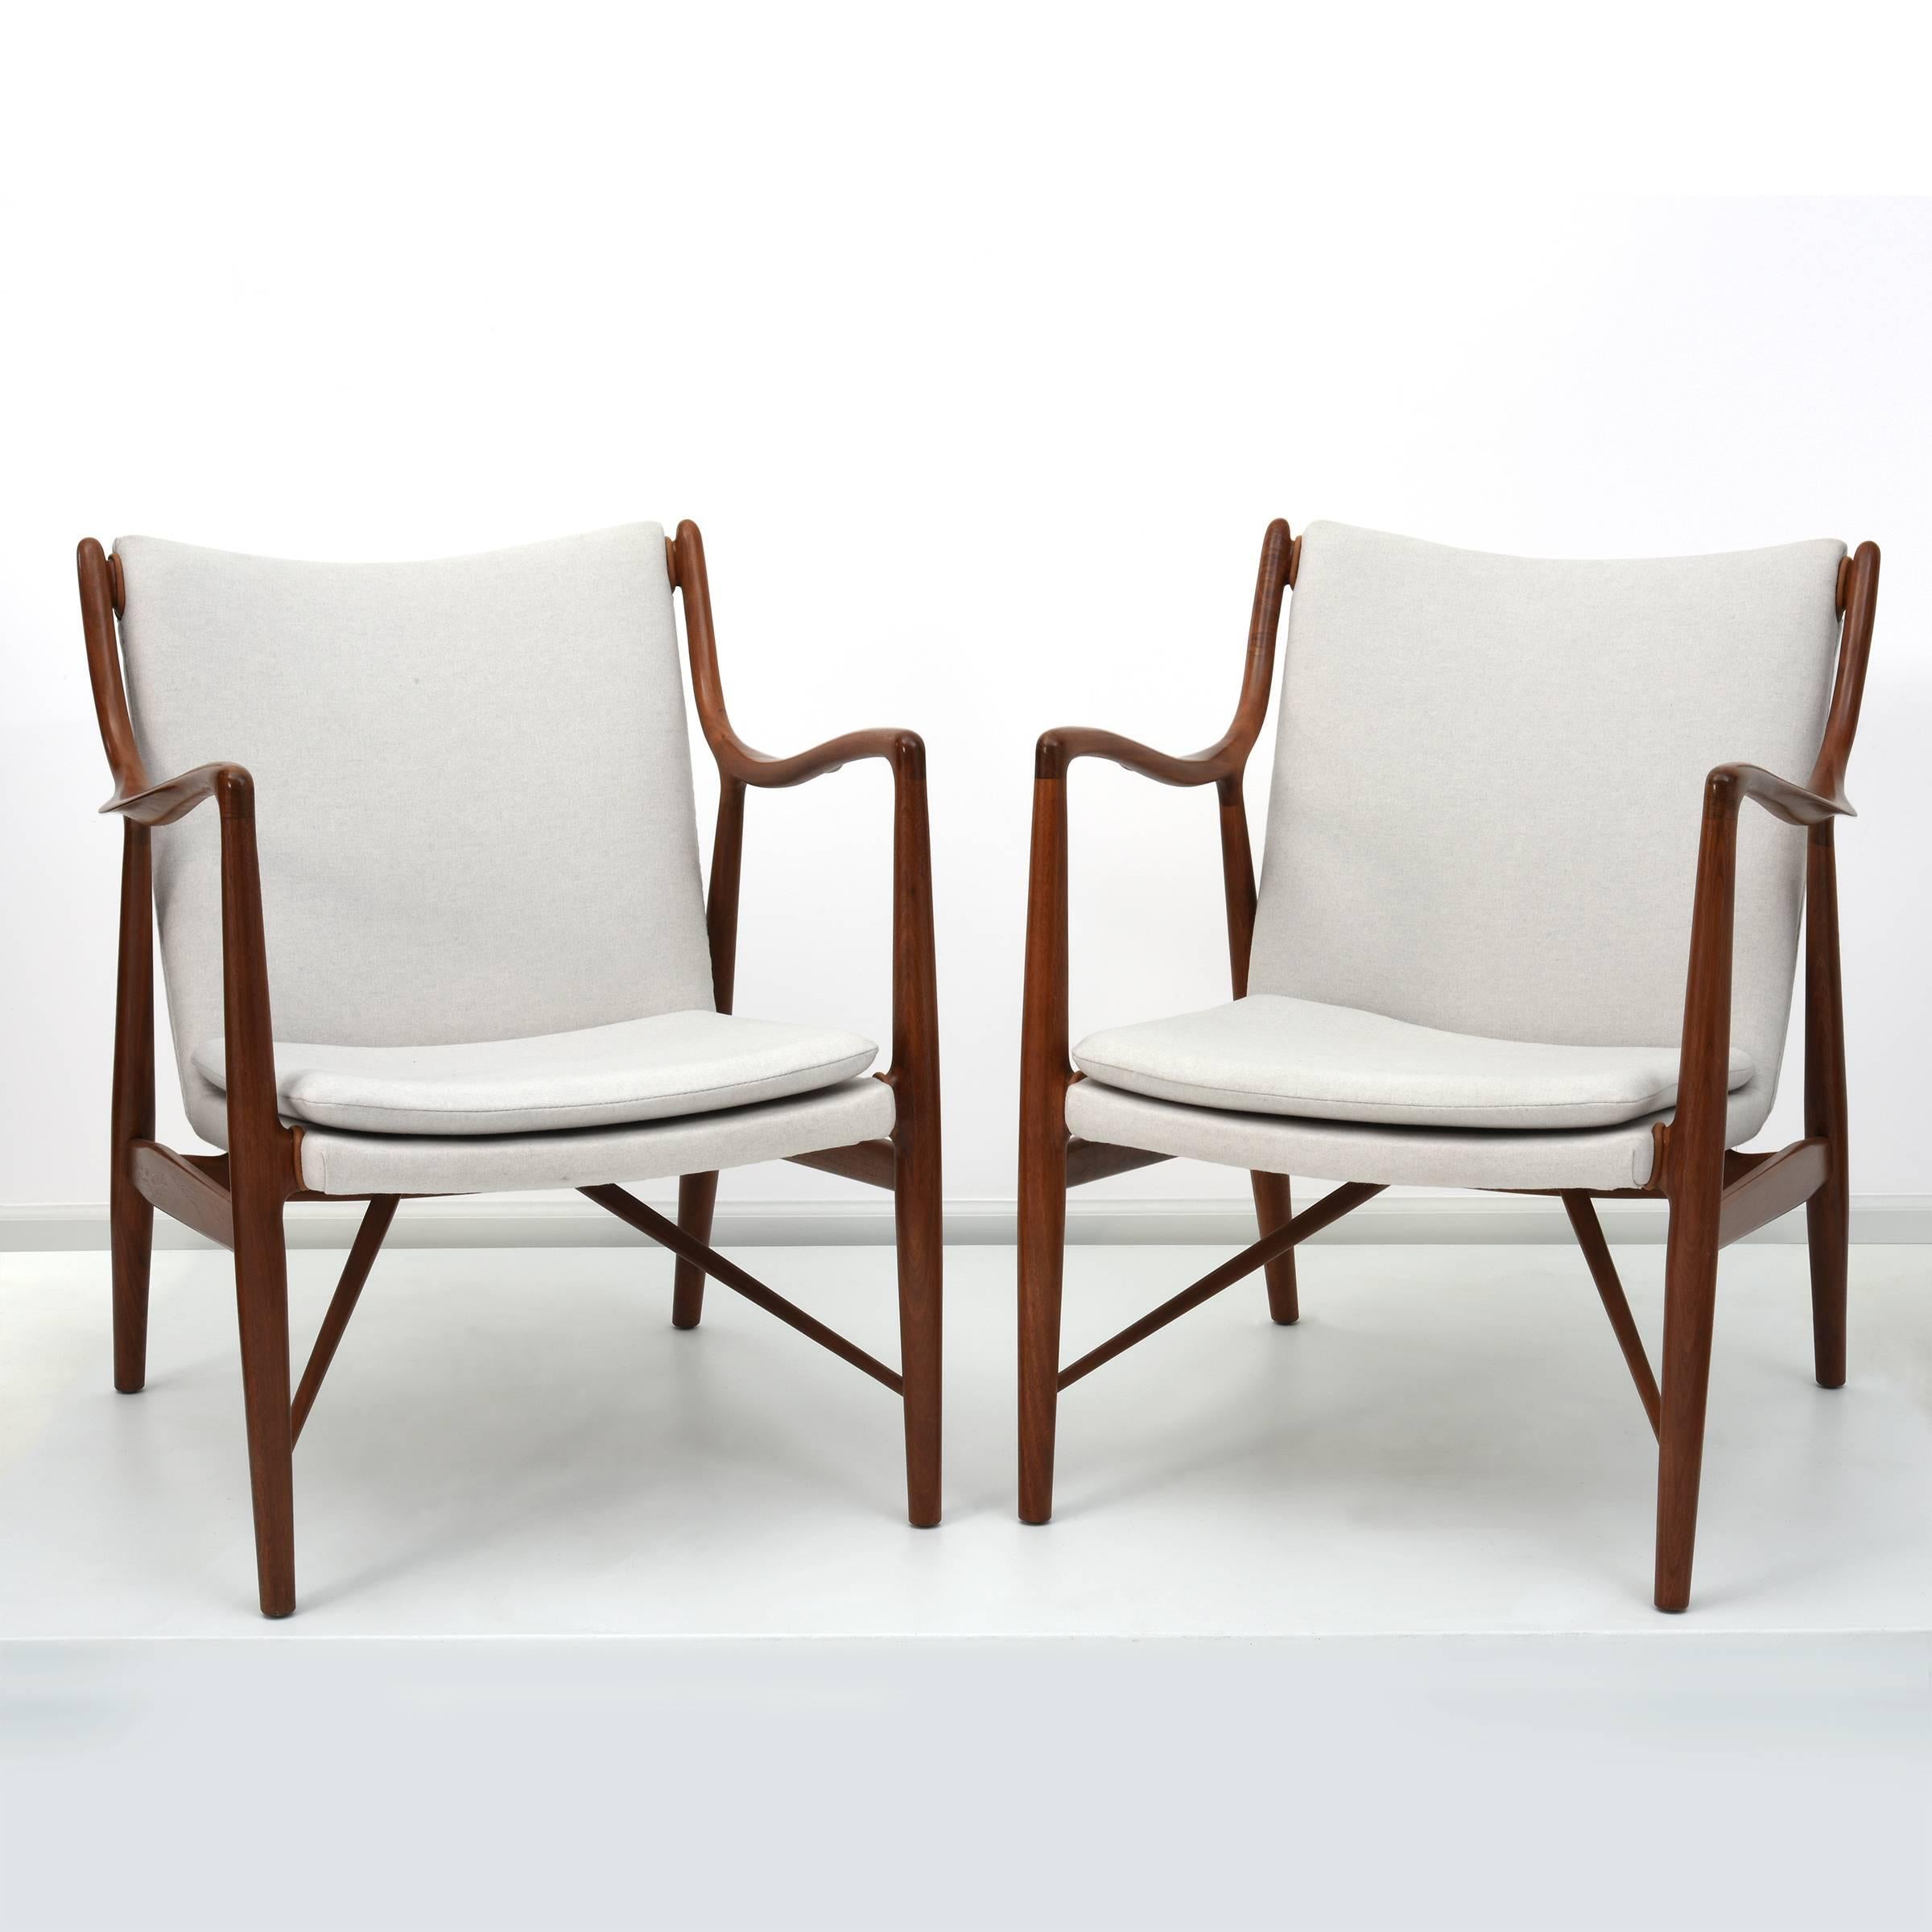 Matched pair of Finn Juhl Armchairs, Model FJ45

Denmark 1945 / USA, circa 1950s
Manufactured by Baker

Sculpted walnut, wool, leather

33 x 25 x 28.5 in
Seat: 18.5 in

Each frame marked.
Originally produced by Niels Vodder, Model NV45
